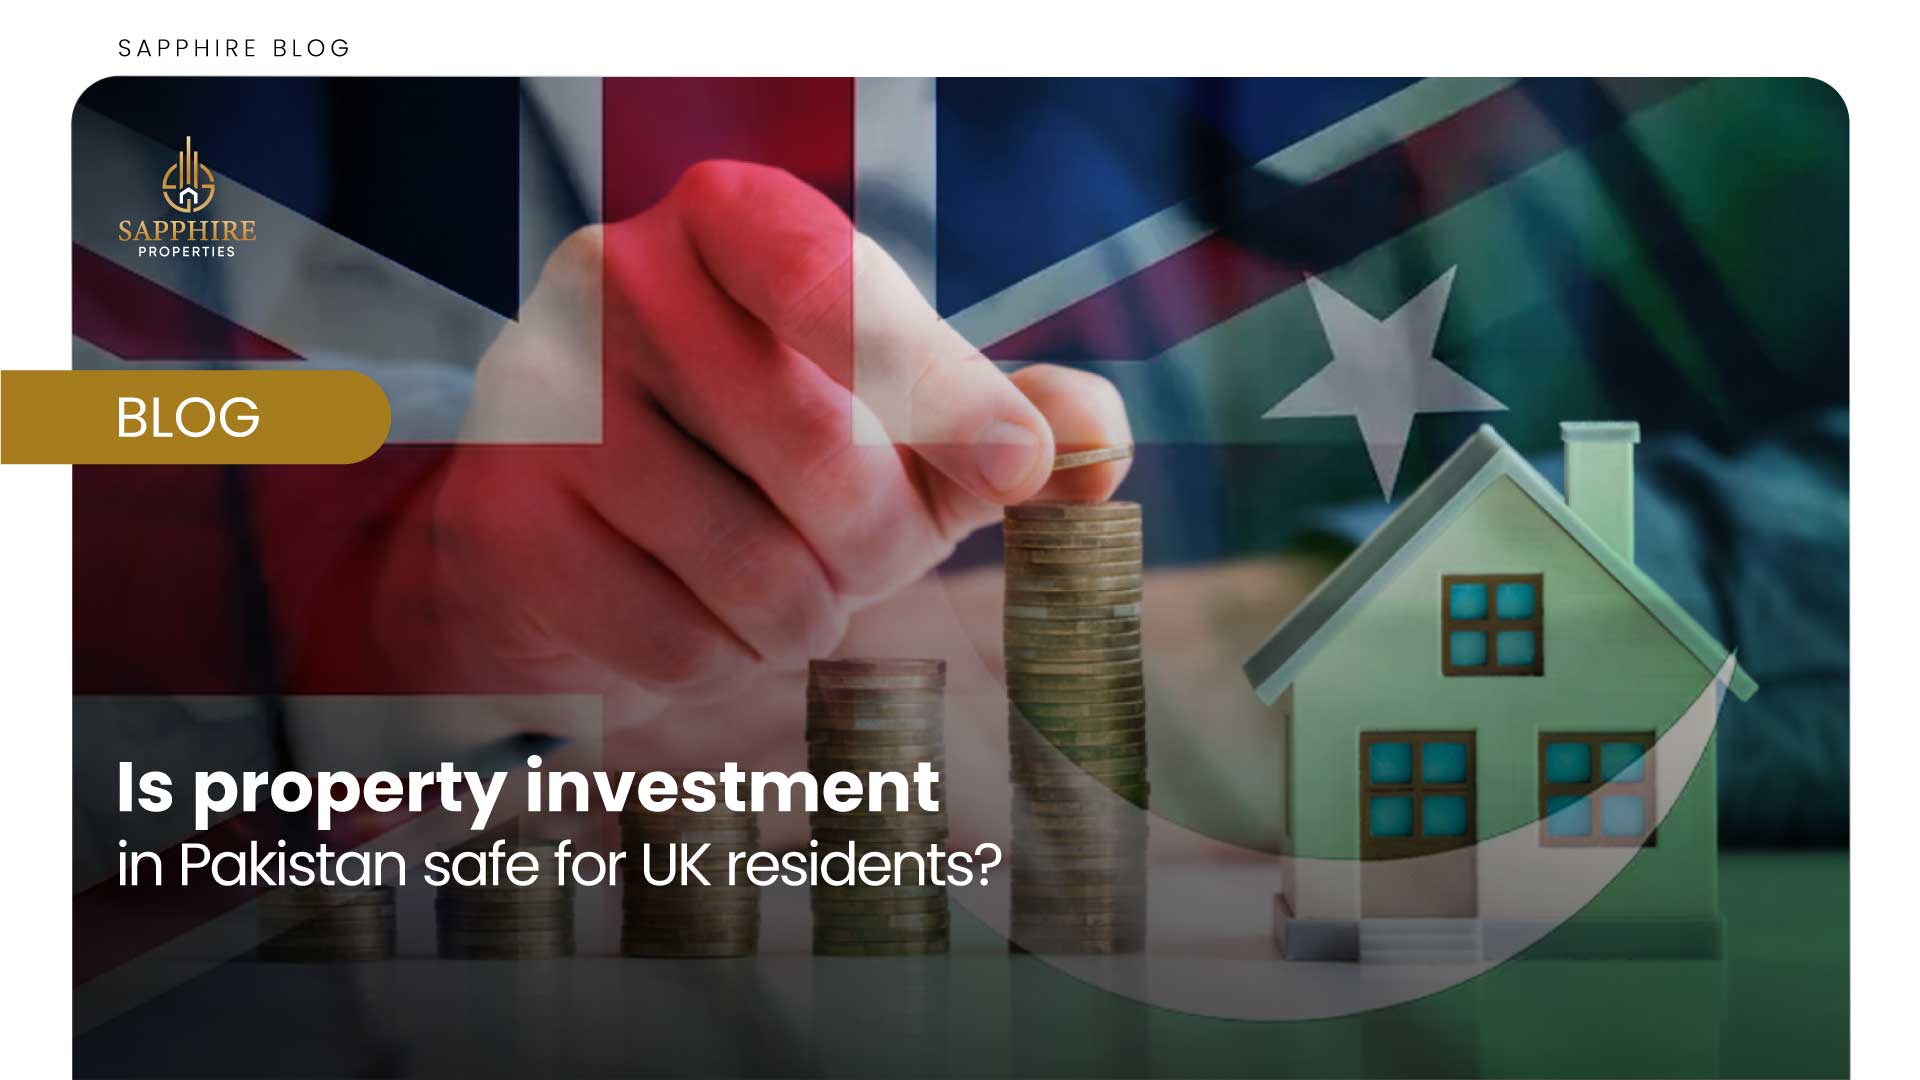 Is Property Investment in Pakistan Safe for UK Residents? SapphireProperties